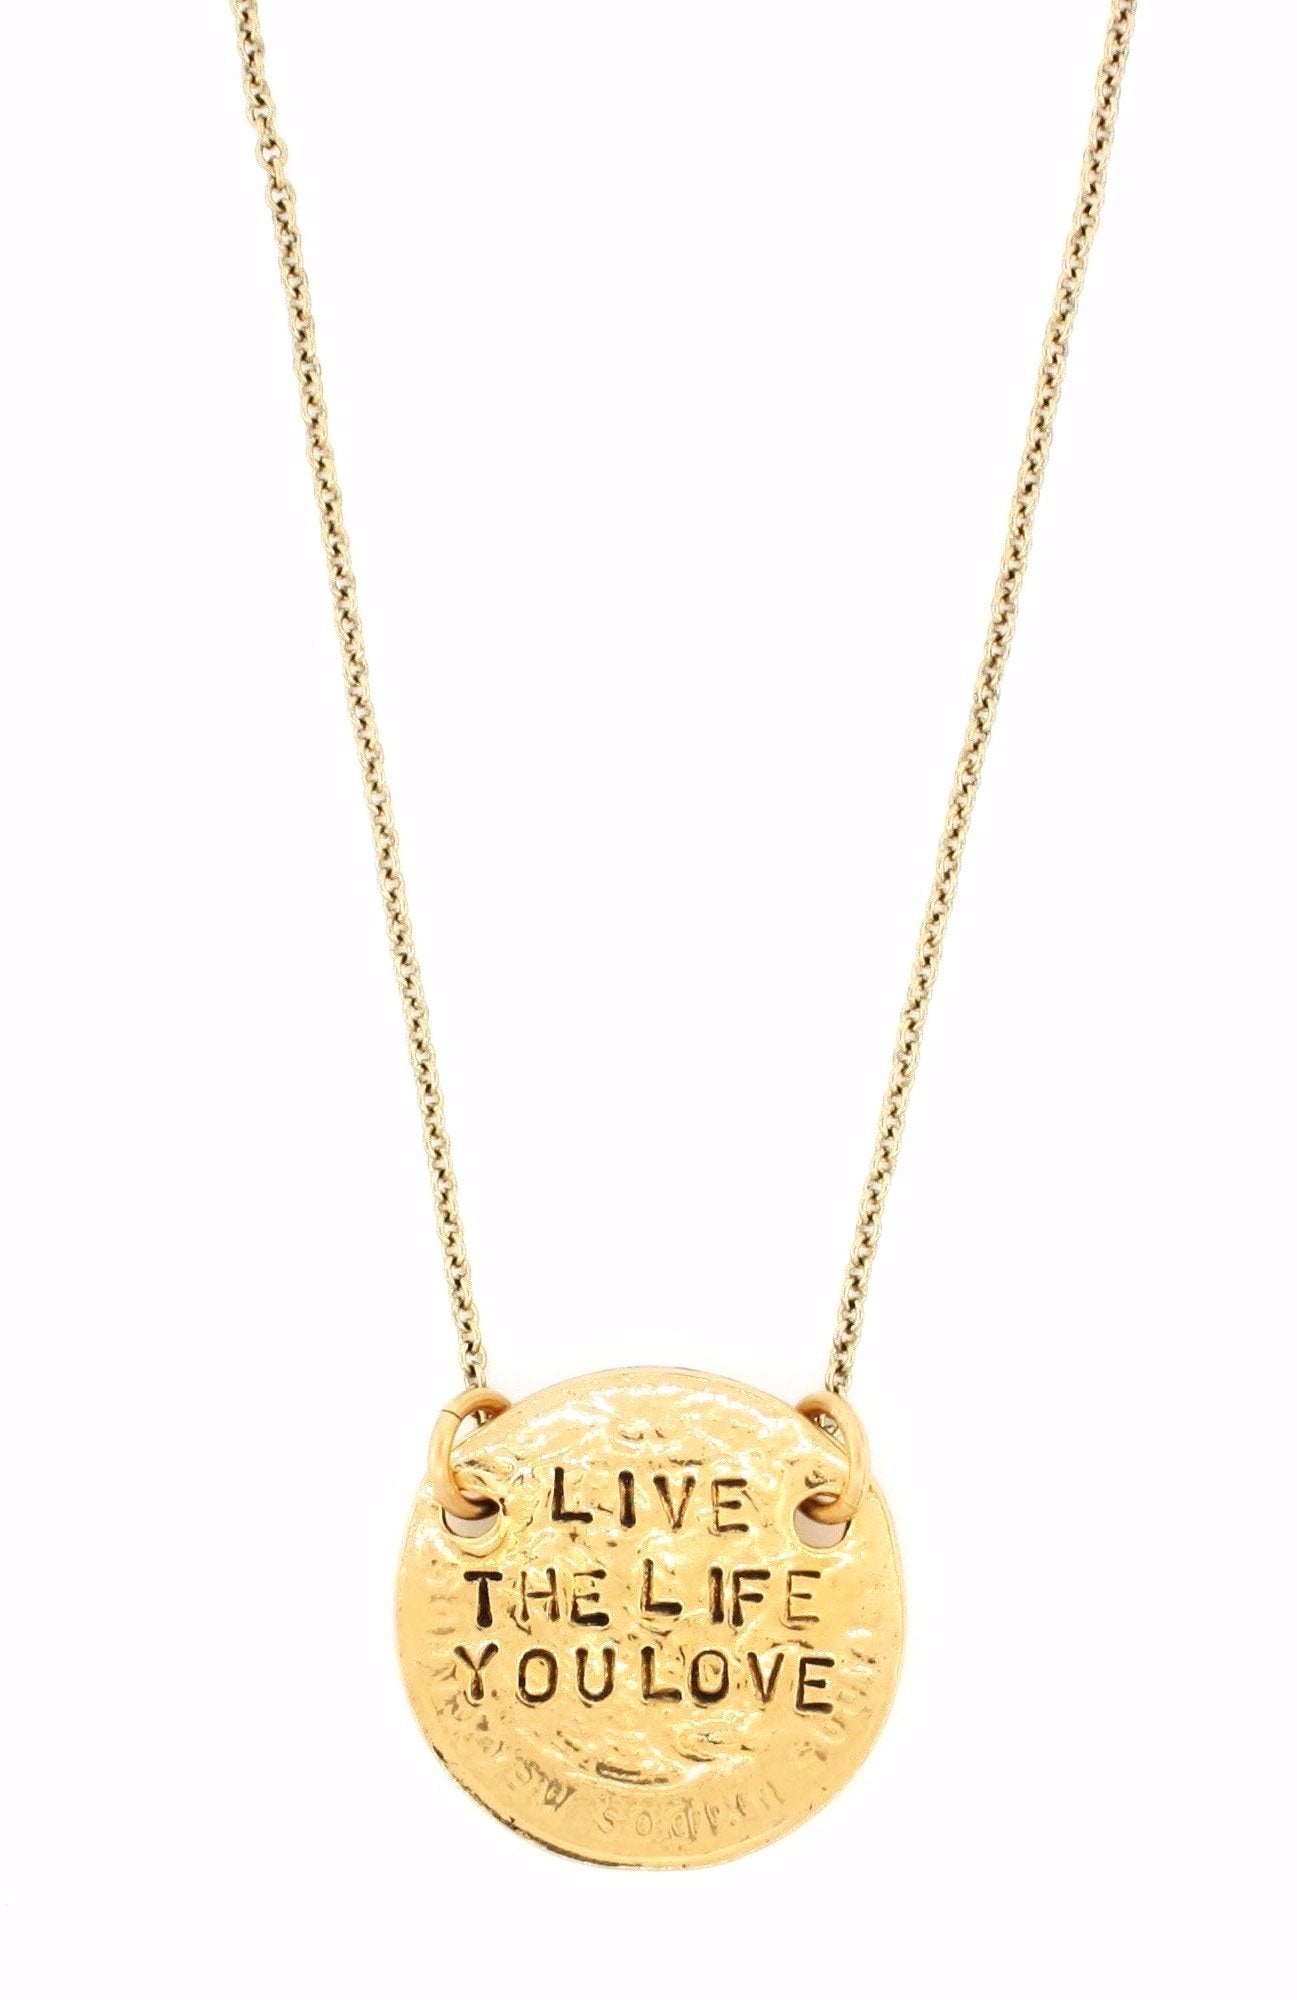 Love the Life You Live/Live the Life You Love Double-Sided Hand Stamped Necklace